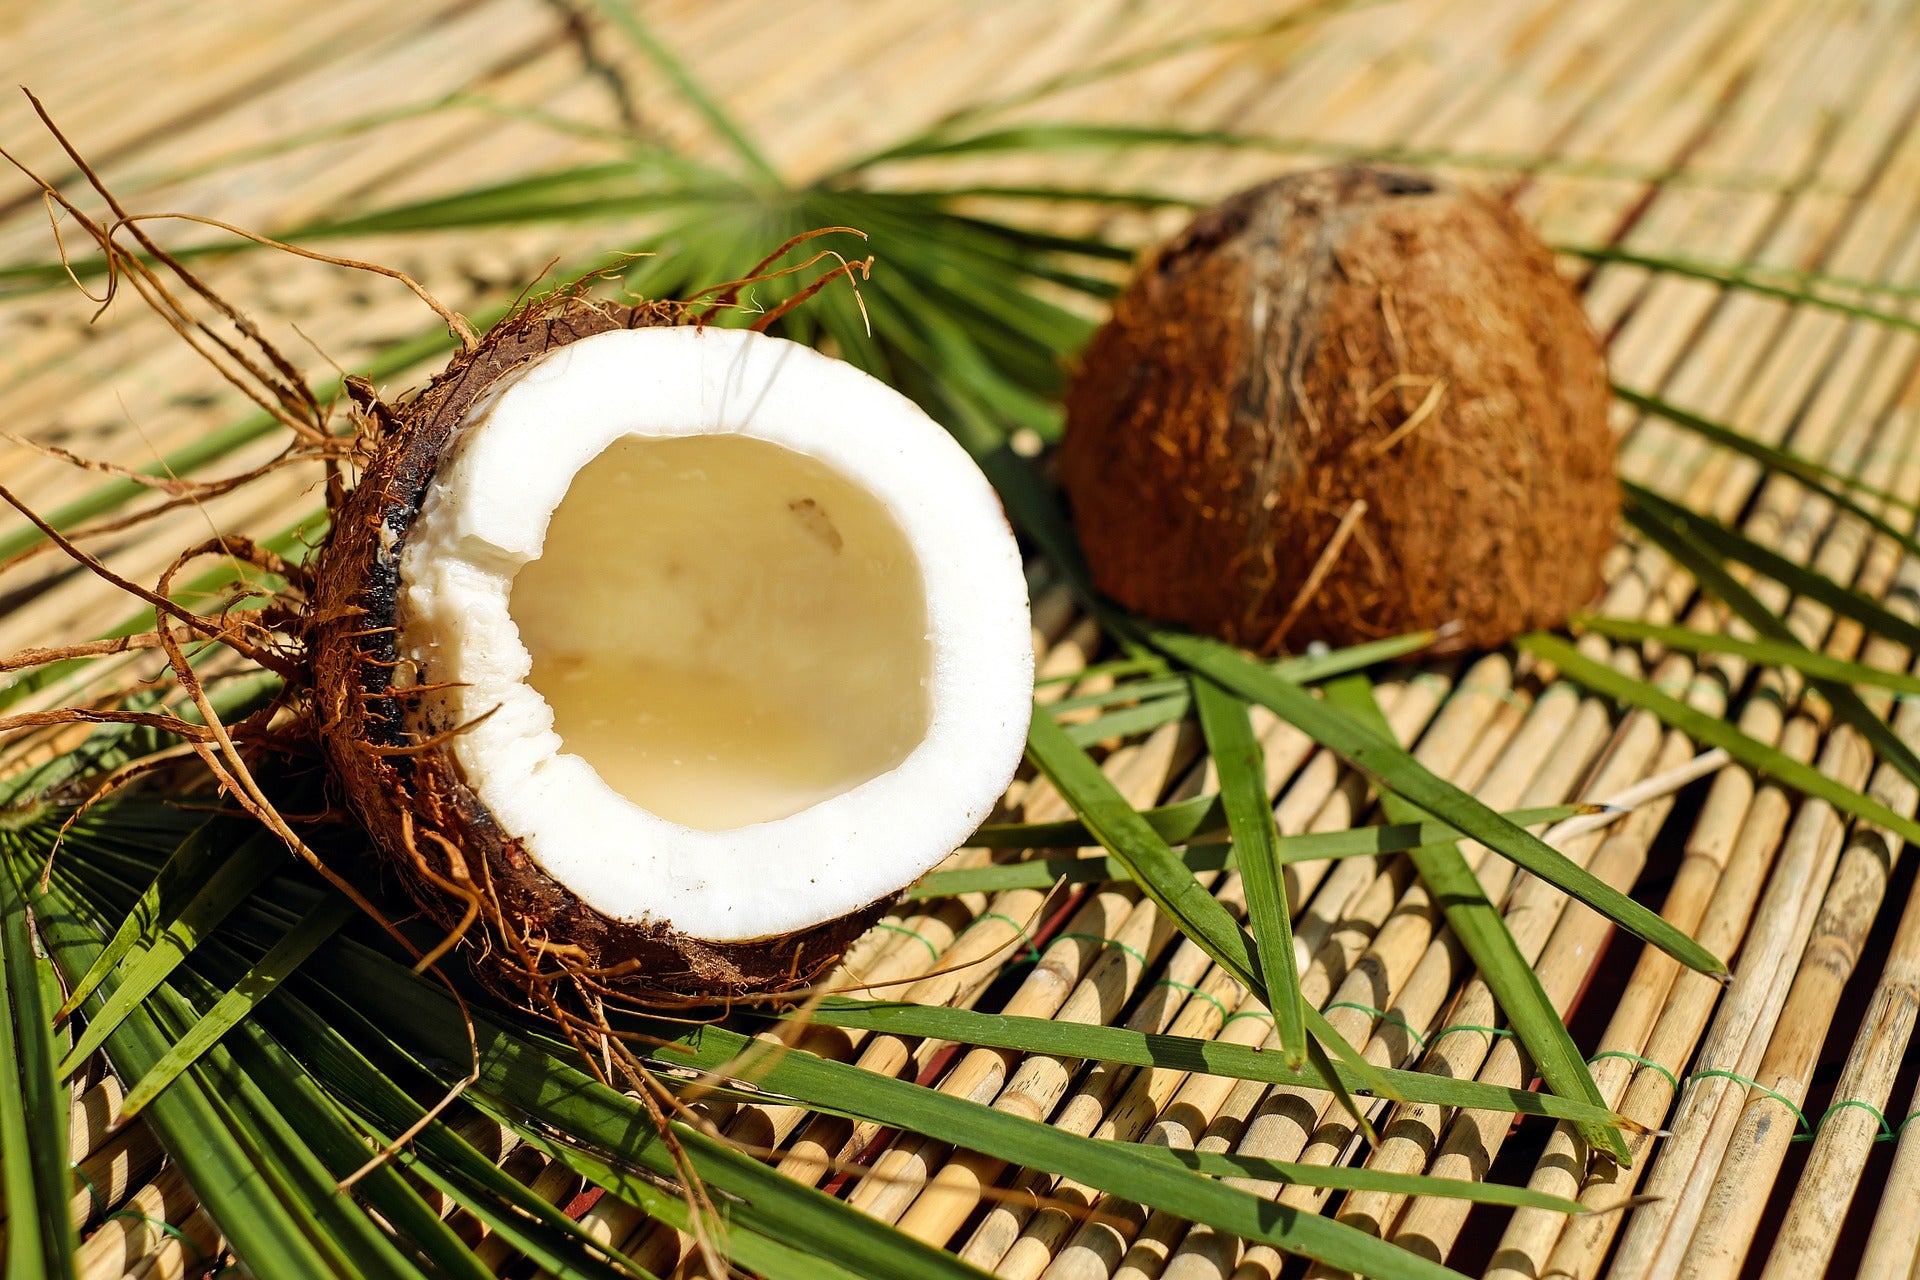 IS COCONUT A NUT?